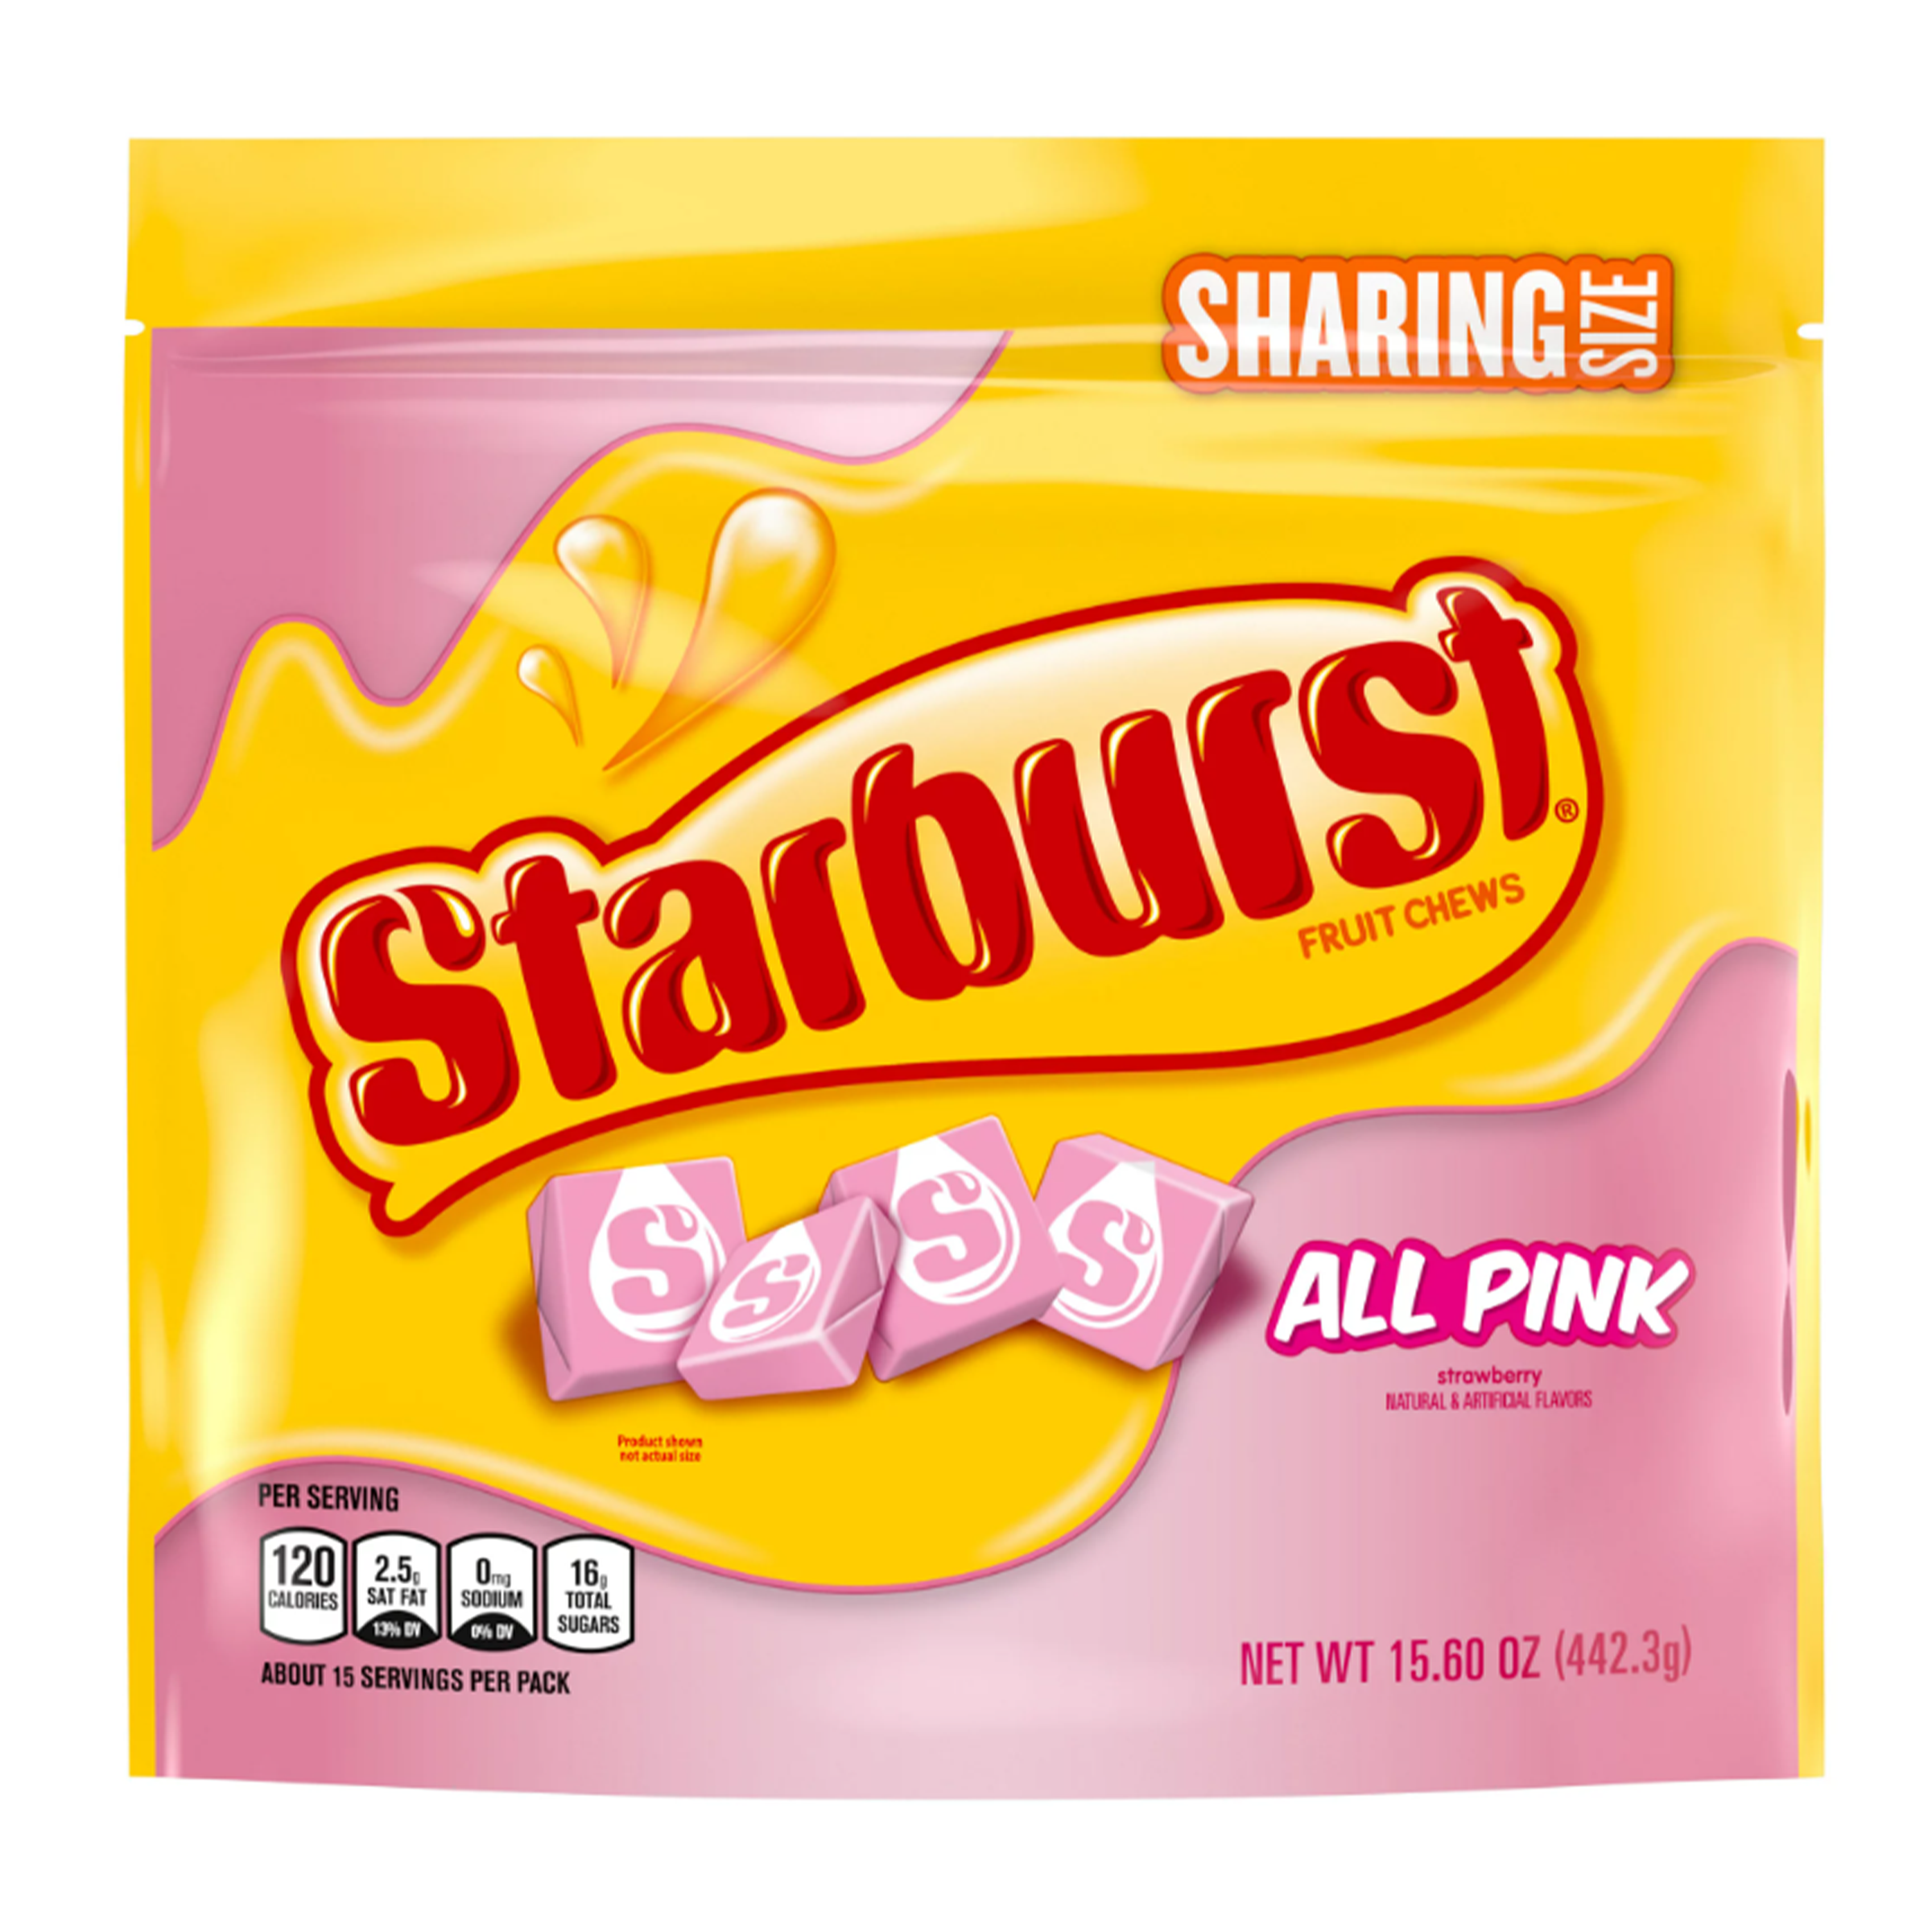 Starburst - All Pink “Share Size”